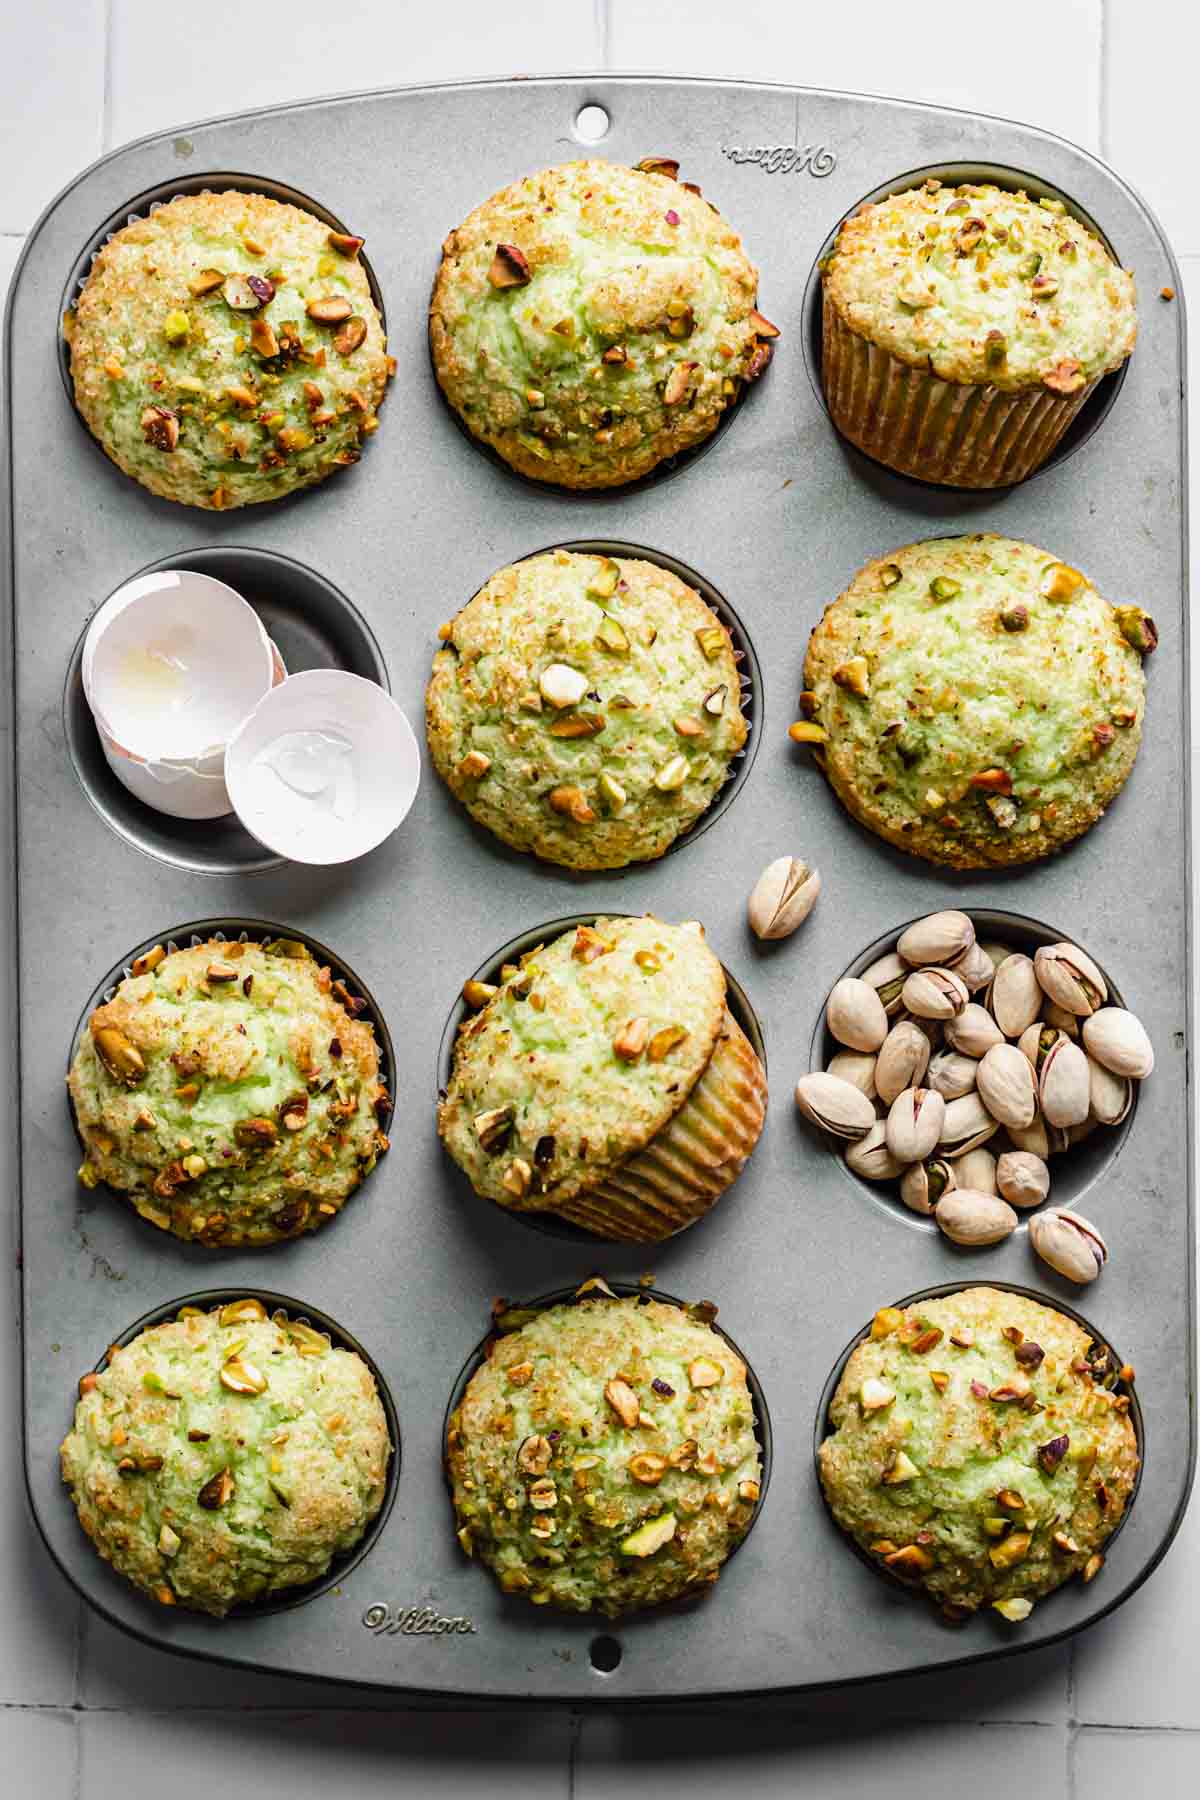 Finished muffins in a pan with egg shells an pistachios filling two of the wells.